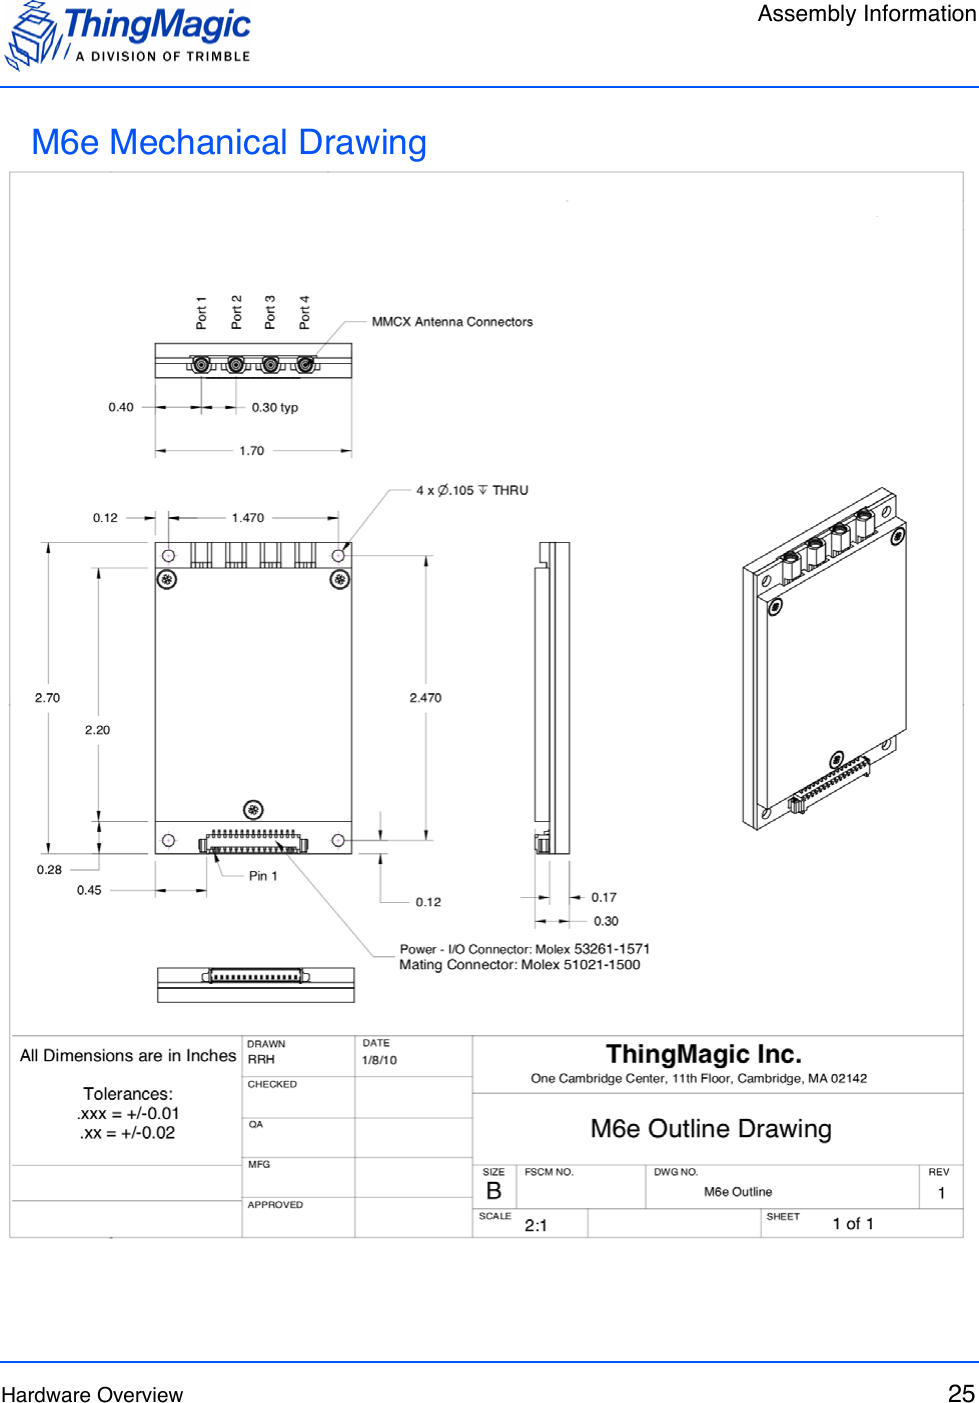 Assembly InformationHardware Overview 25M6e Mechanical Drawing